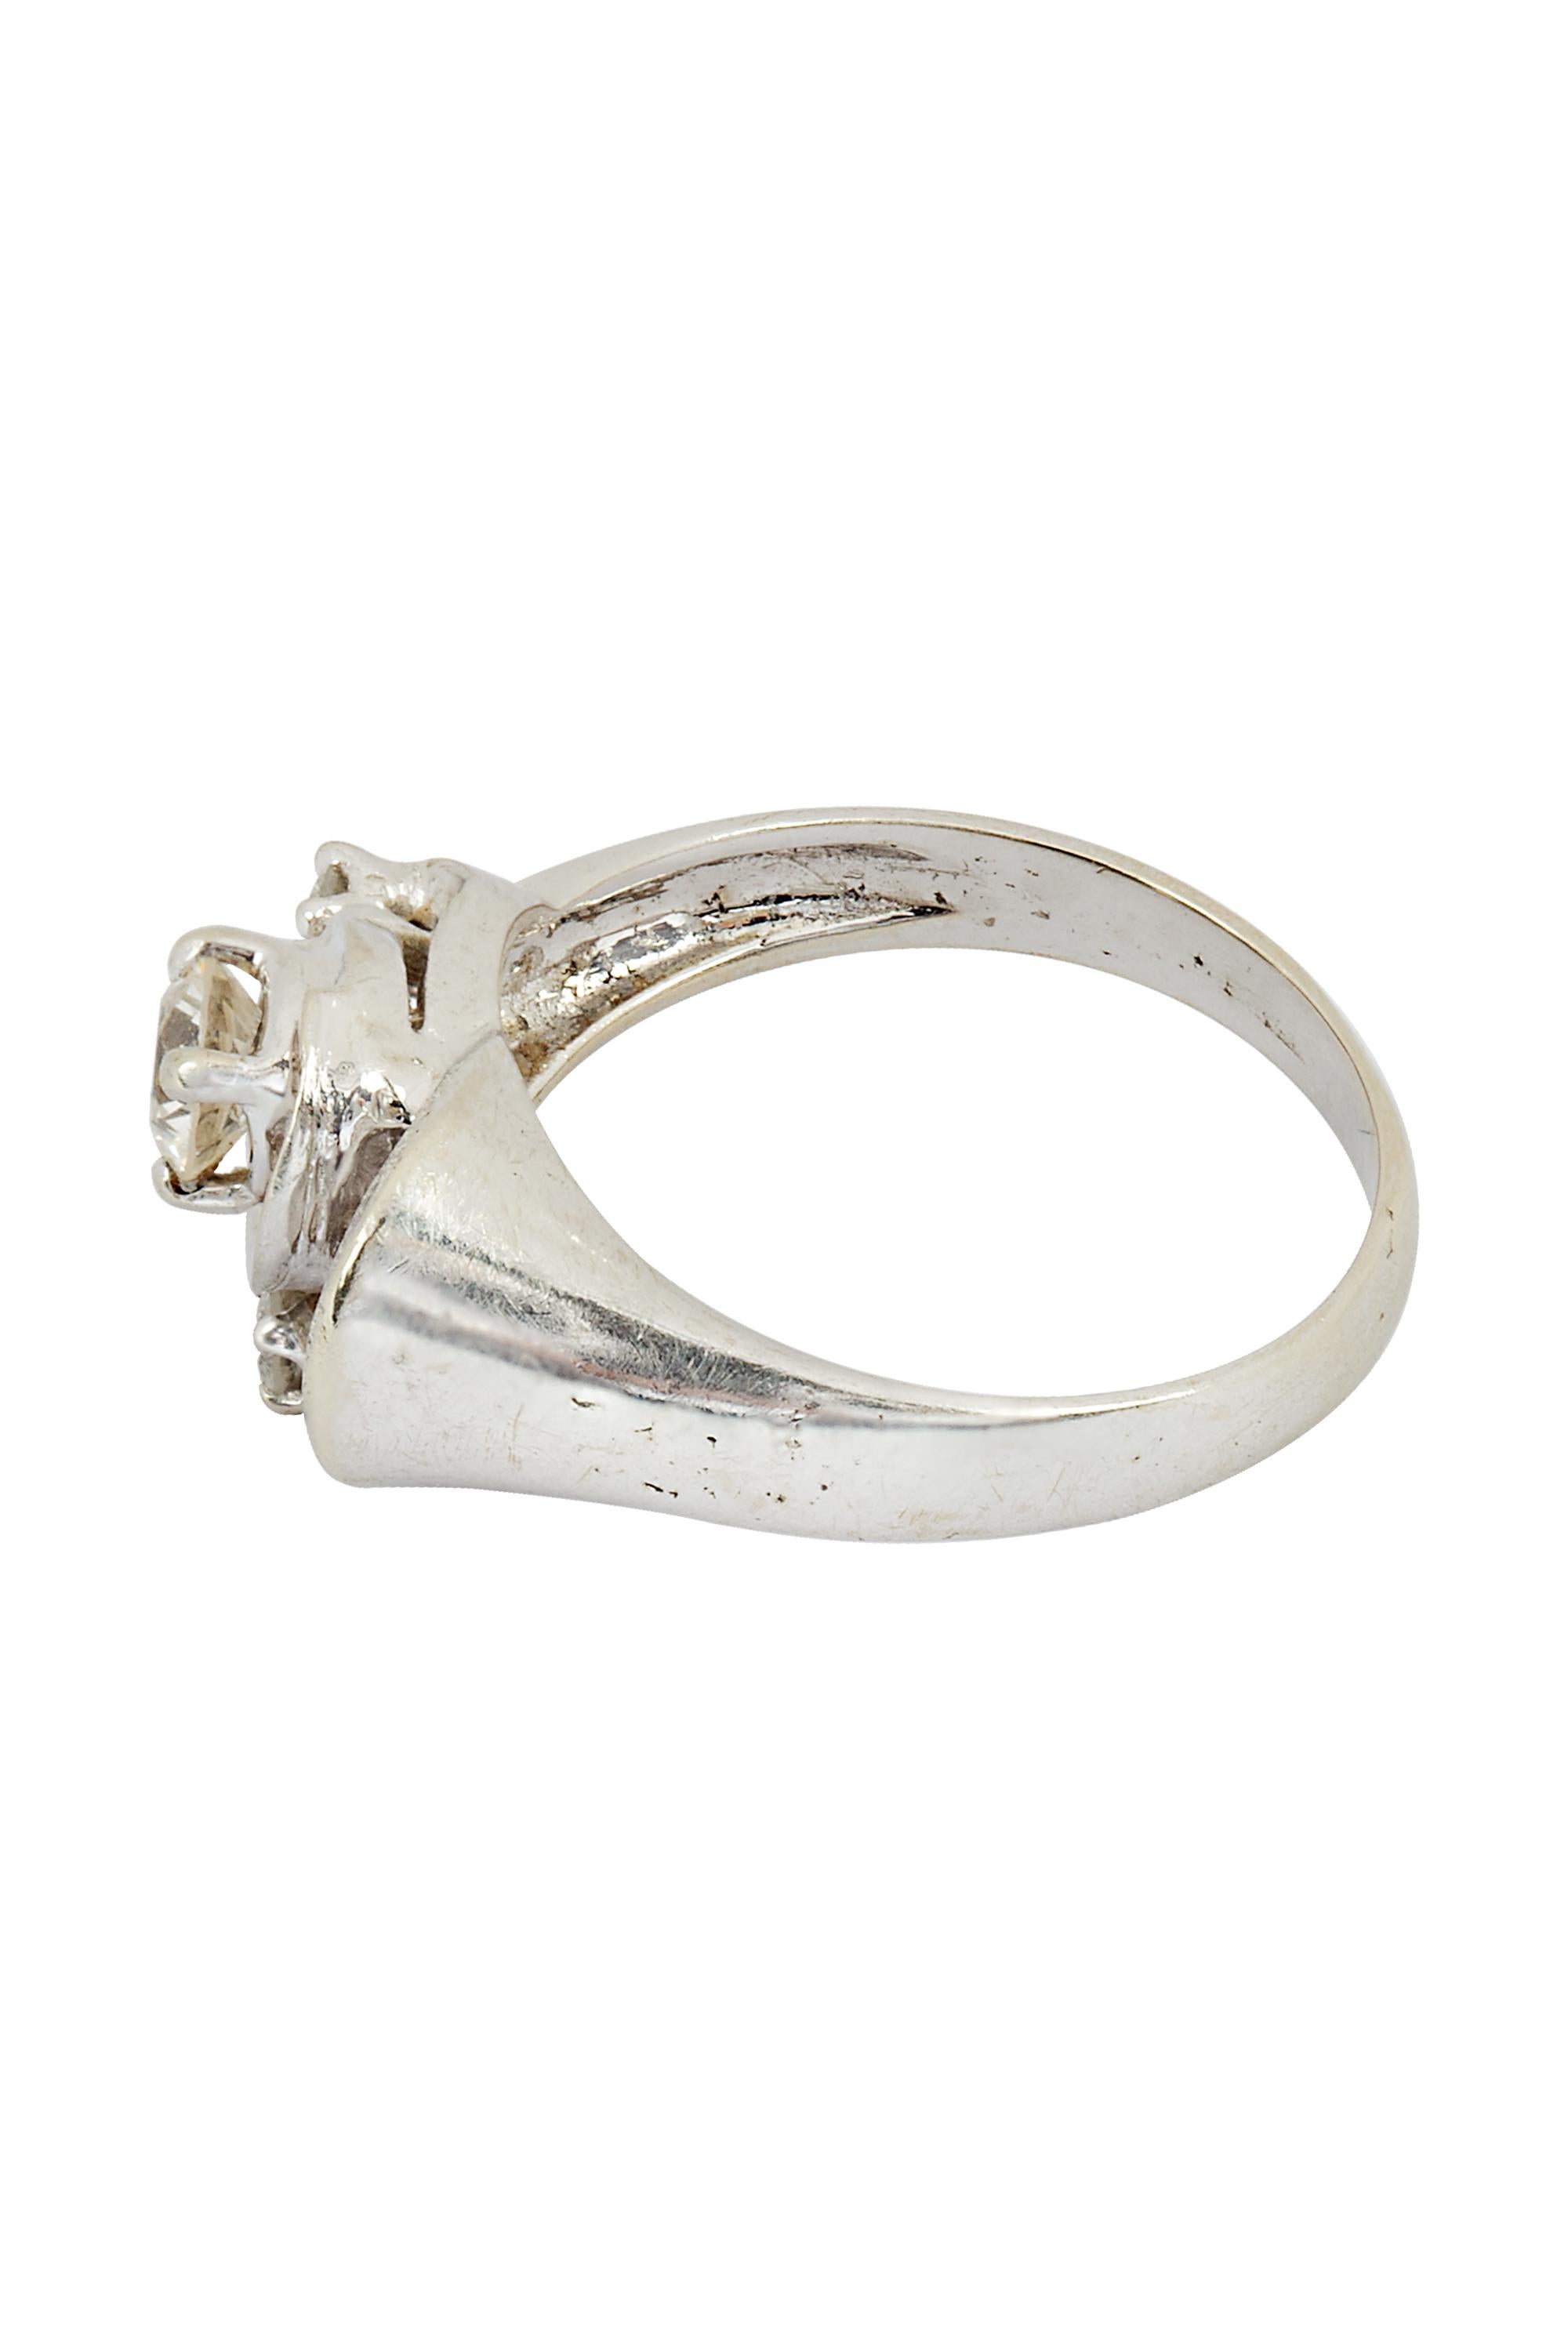 Retro Vintage Free-Flowing Diamond Etching Ring For Sale